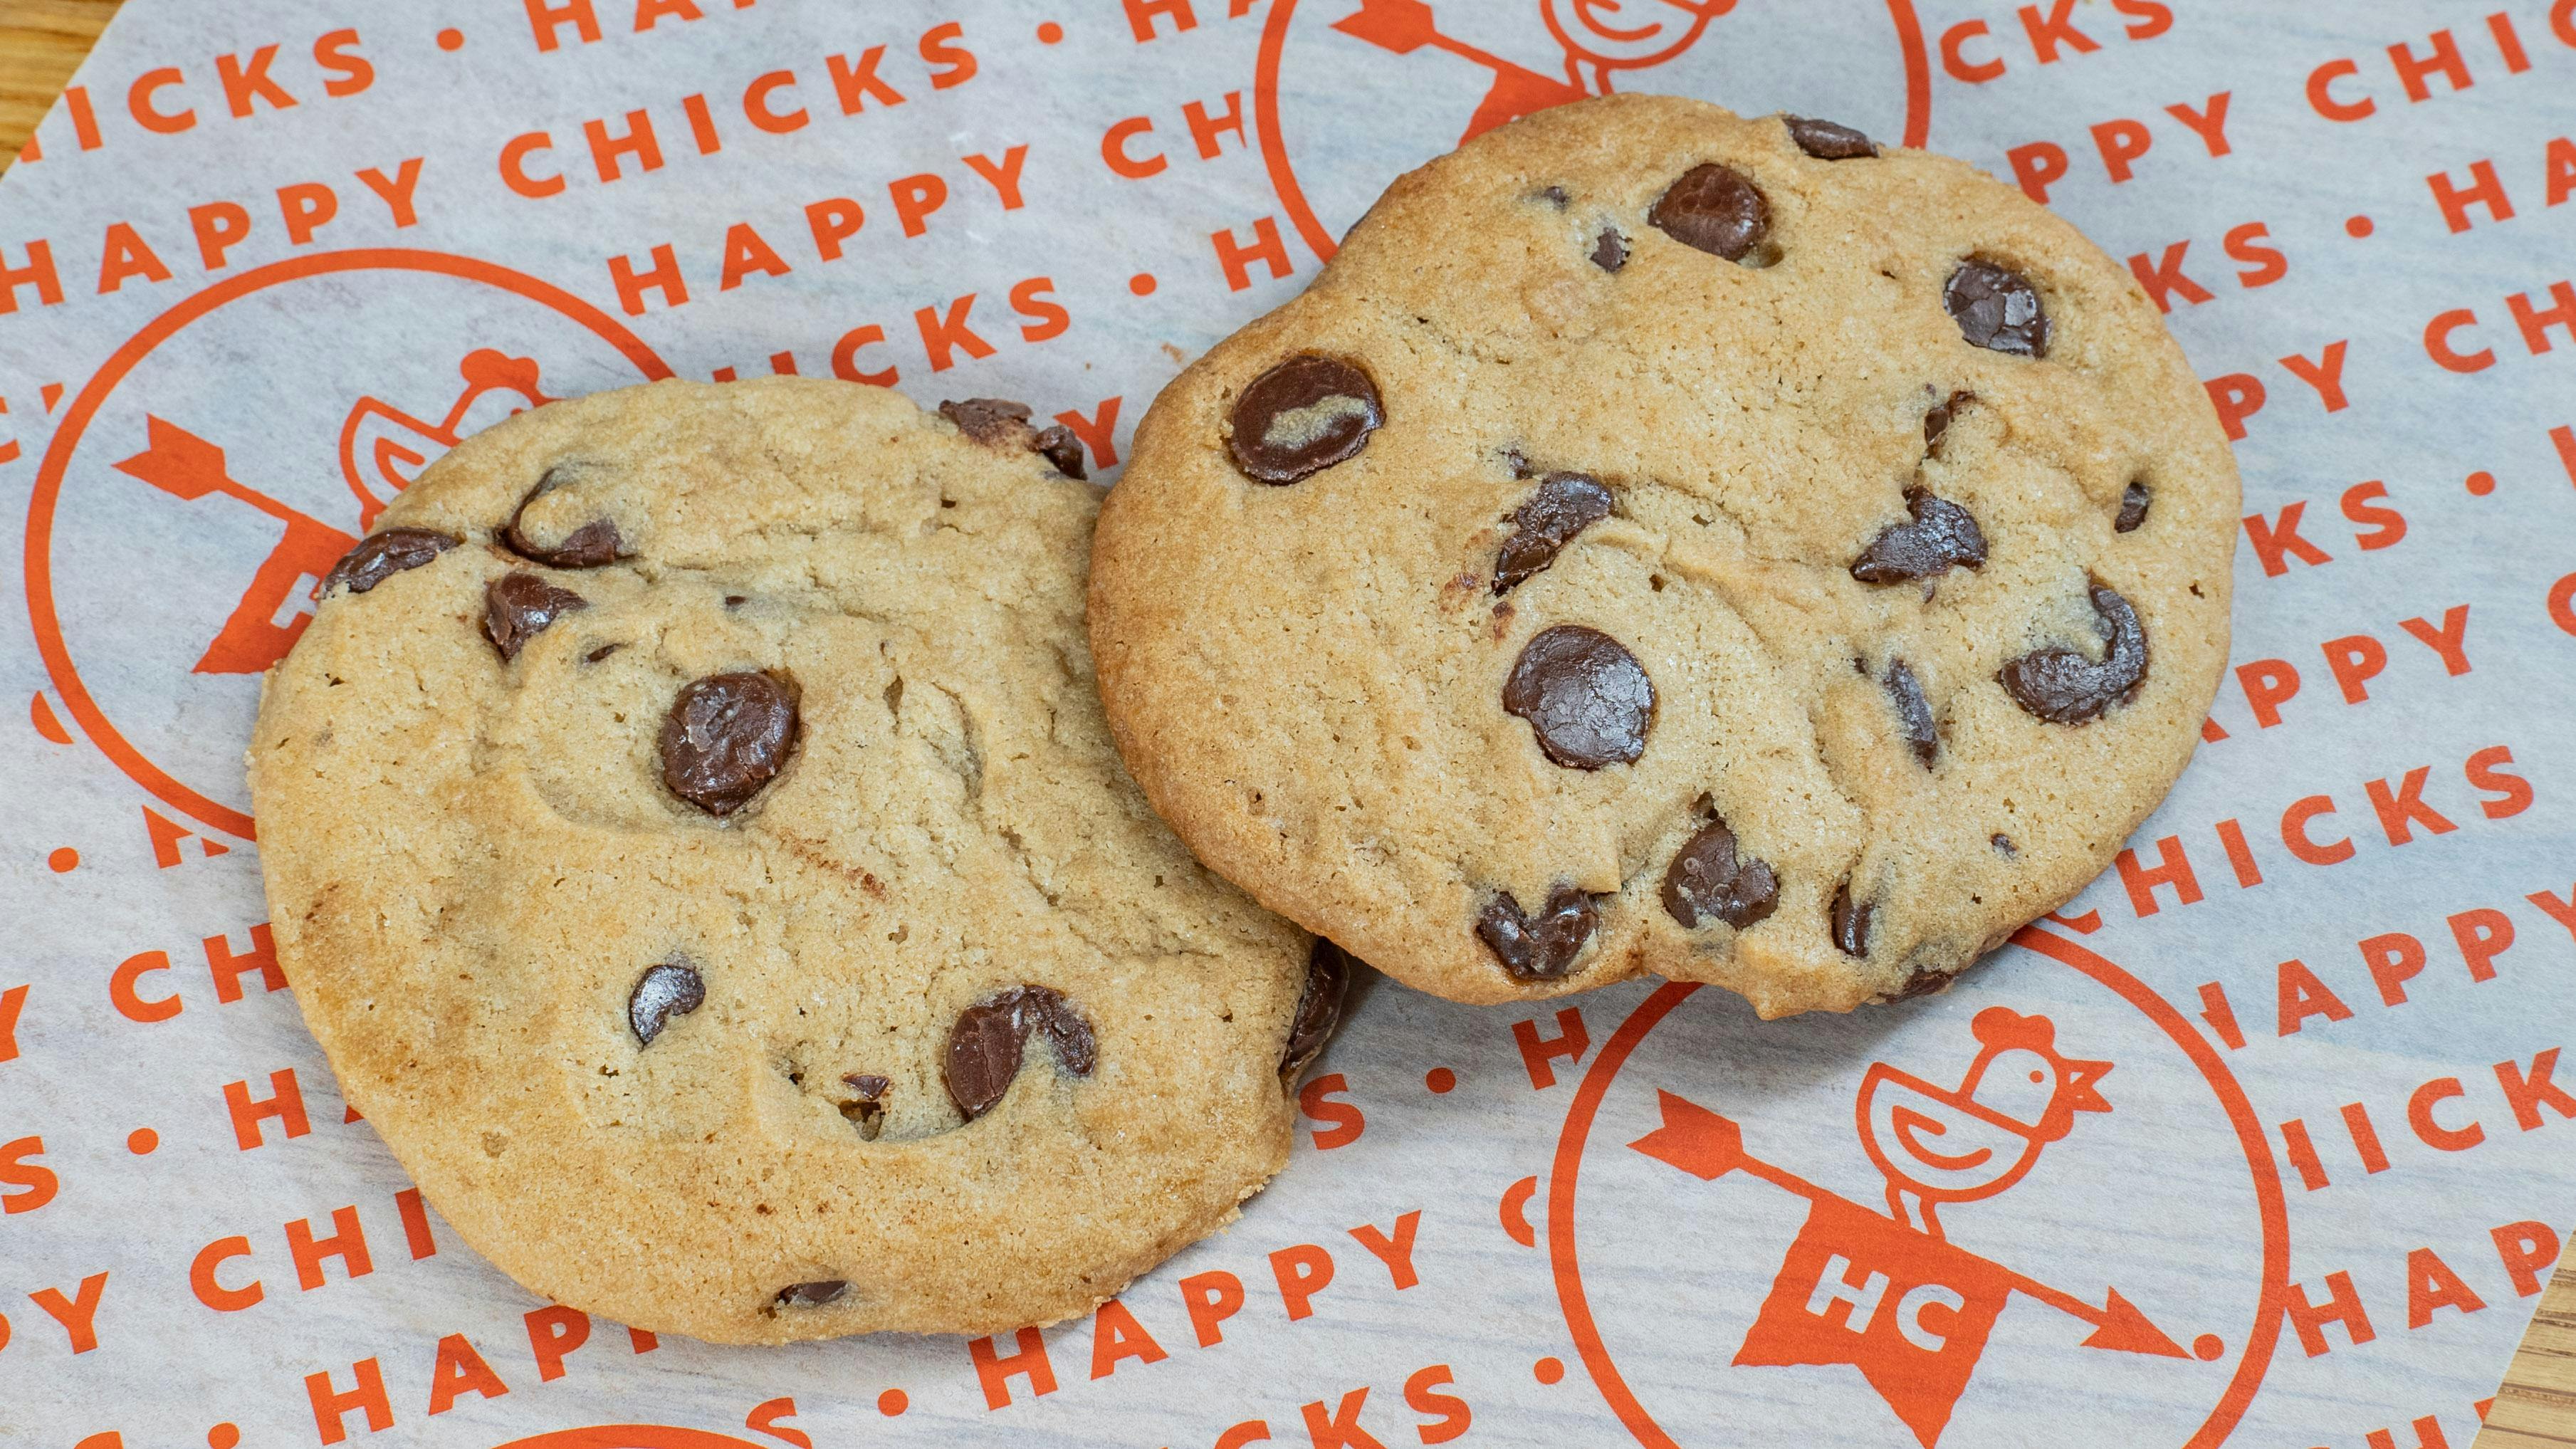 Cookies from Happy Chicks - Burnet Rd in Austin, TX